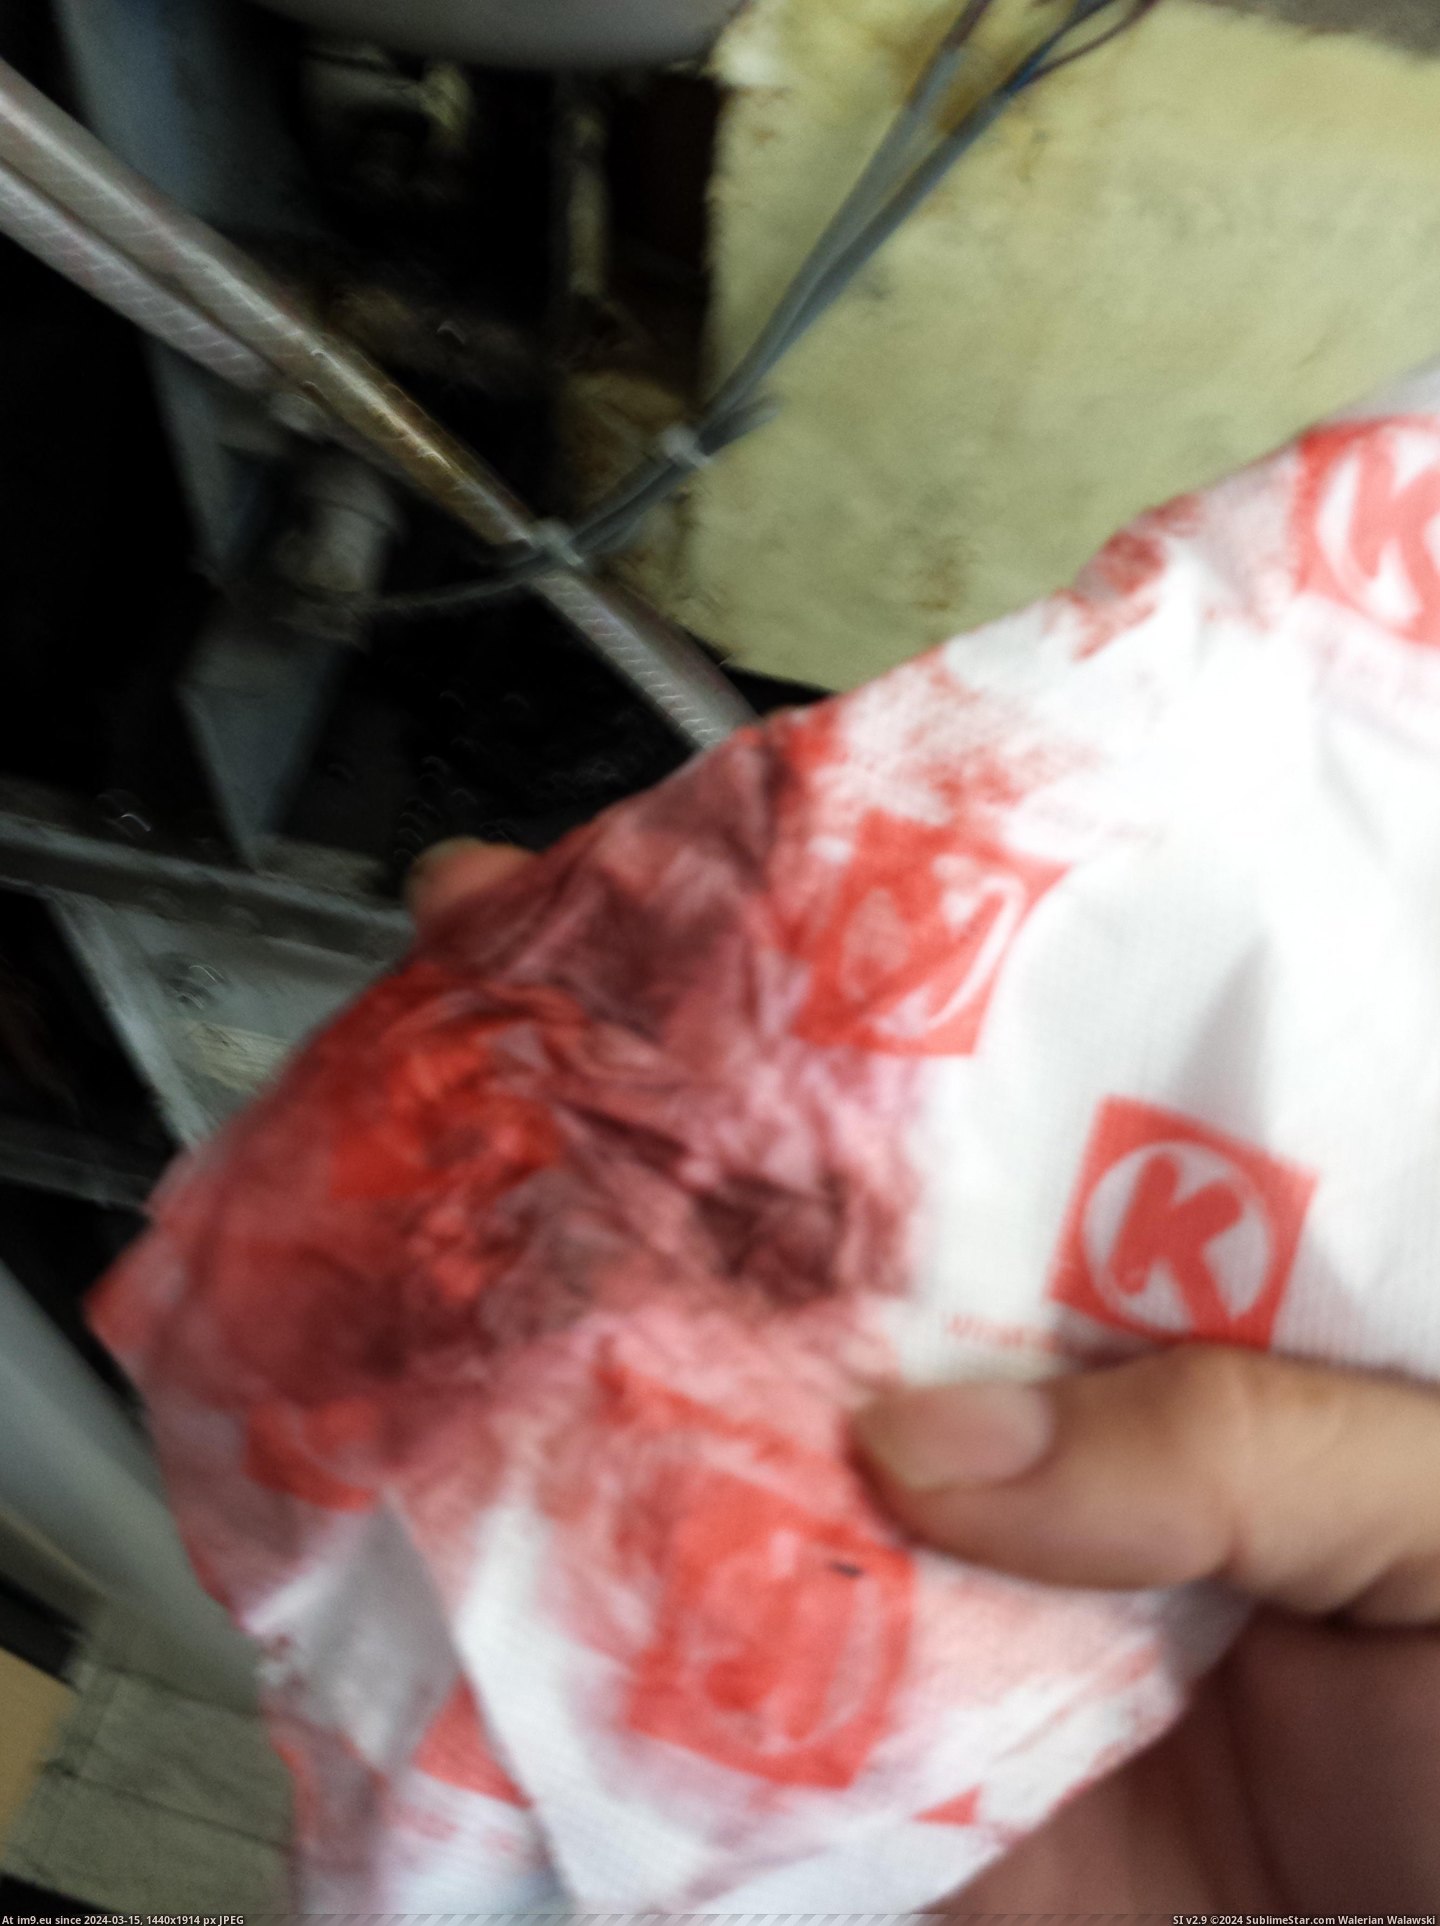 #Wtf #Drink #Frozen #Coke #Regularly #Beverage #Froster #Service #Anymore #Machines [Wtf] I service Froster frozen beverage machines regularly, and because of it, I don't drink coke anymore. 1 Pic. (Obraz z album My r/WTF favs))